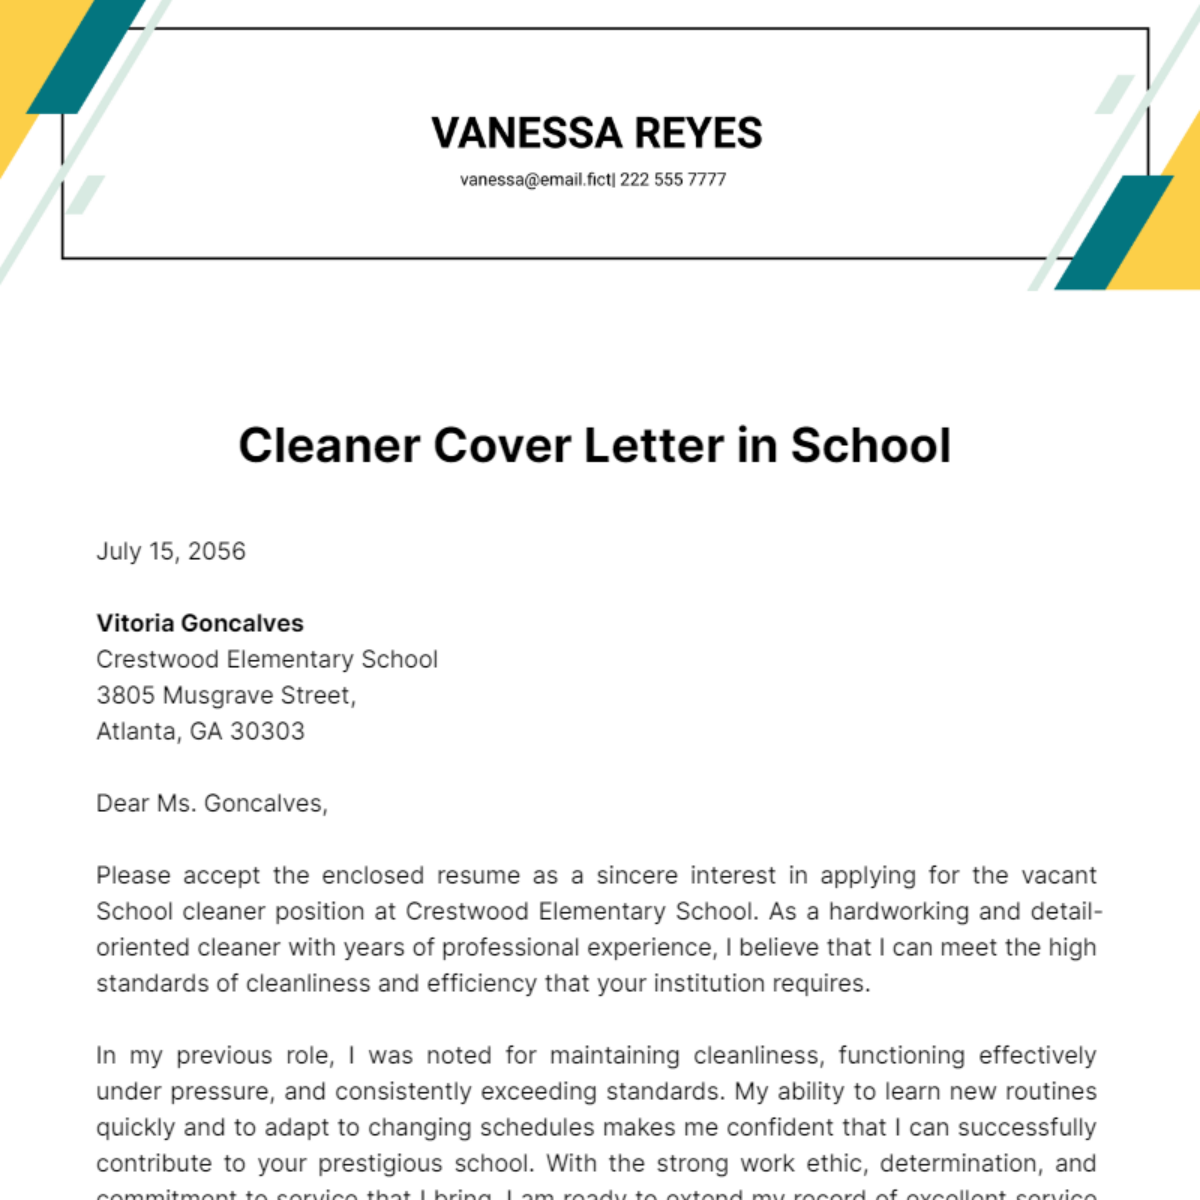 Cleaner Cover Letter in School Template